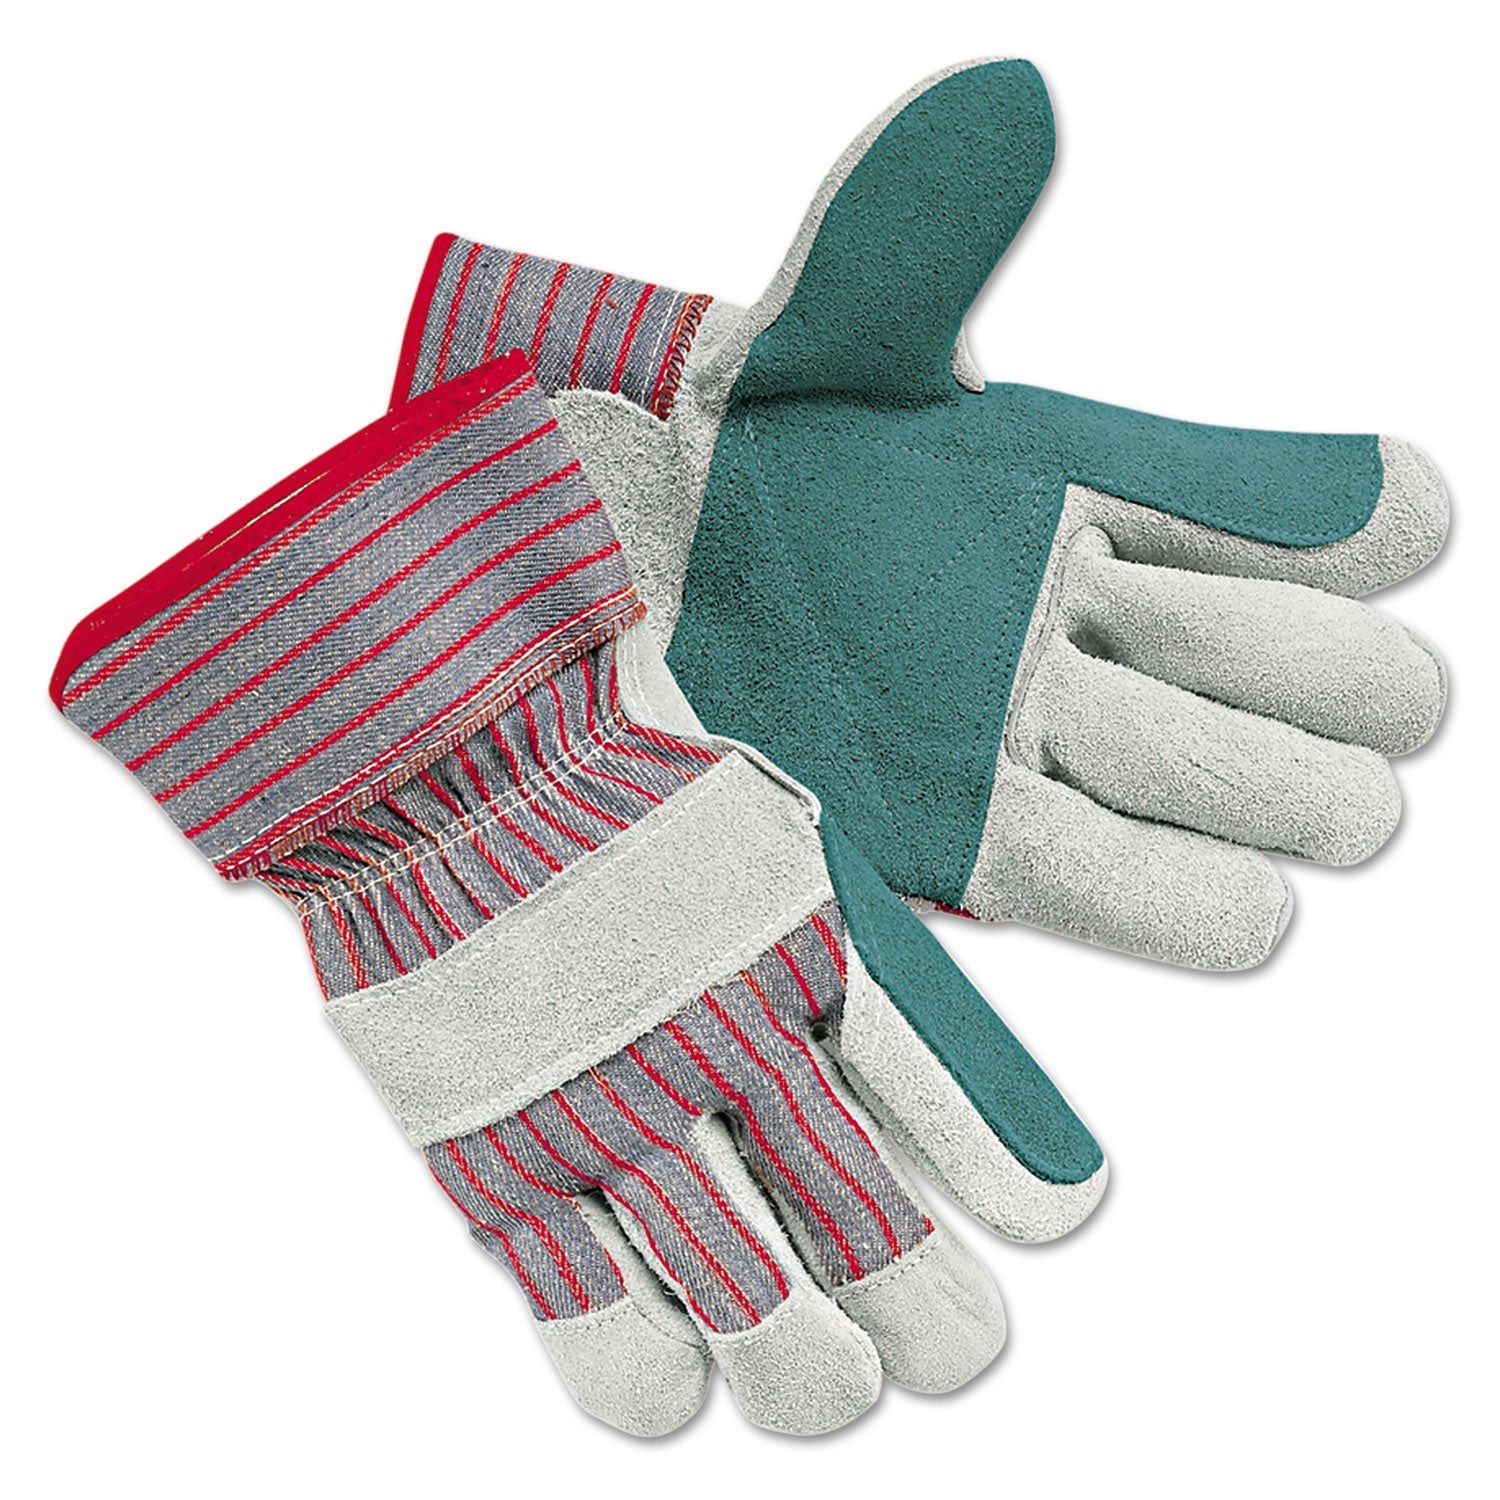 Men's Economy Leather Palm Gloves, White/Red, Large, 12 Pairs - 